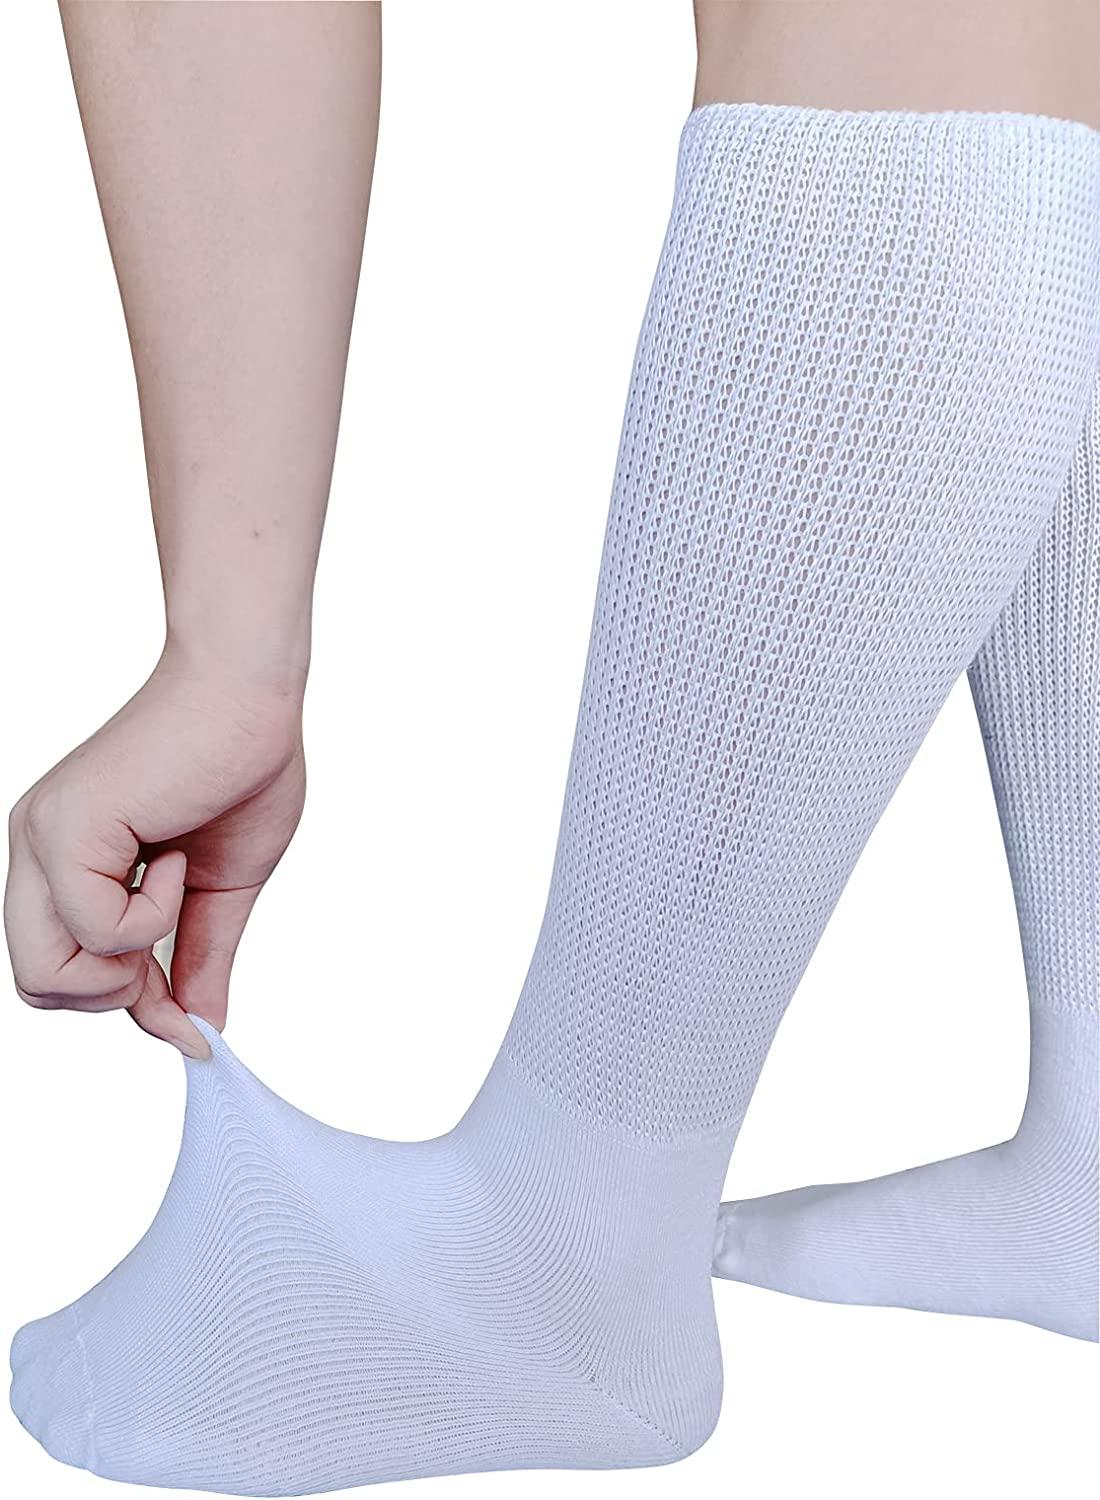 Extra Wide Lymphedema Bariatric Socks Walking boot Sock Liner for Cam  Walkers Brace Orthopedics Boot White